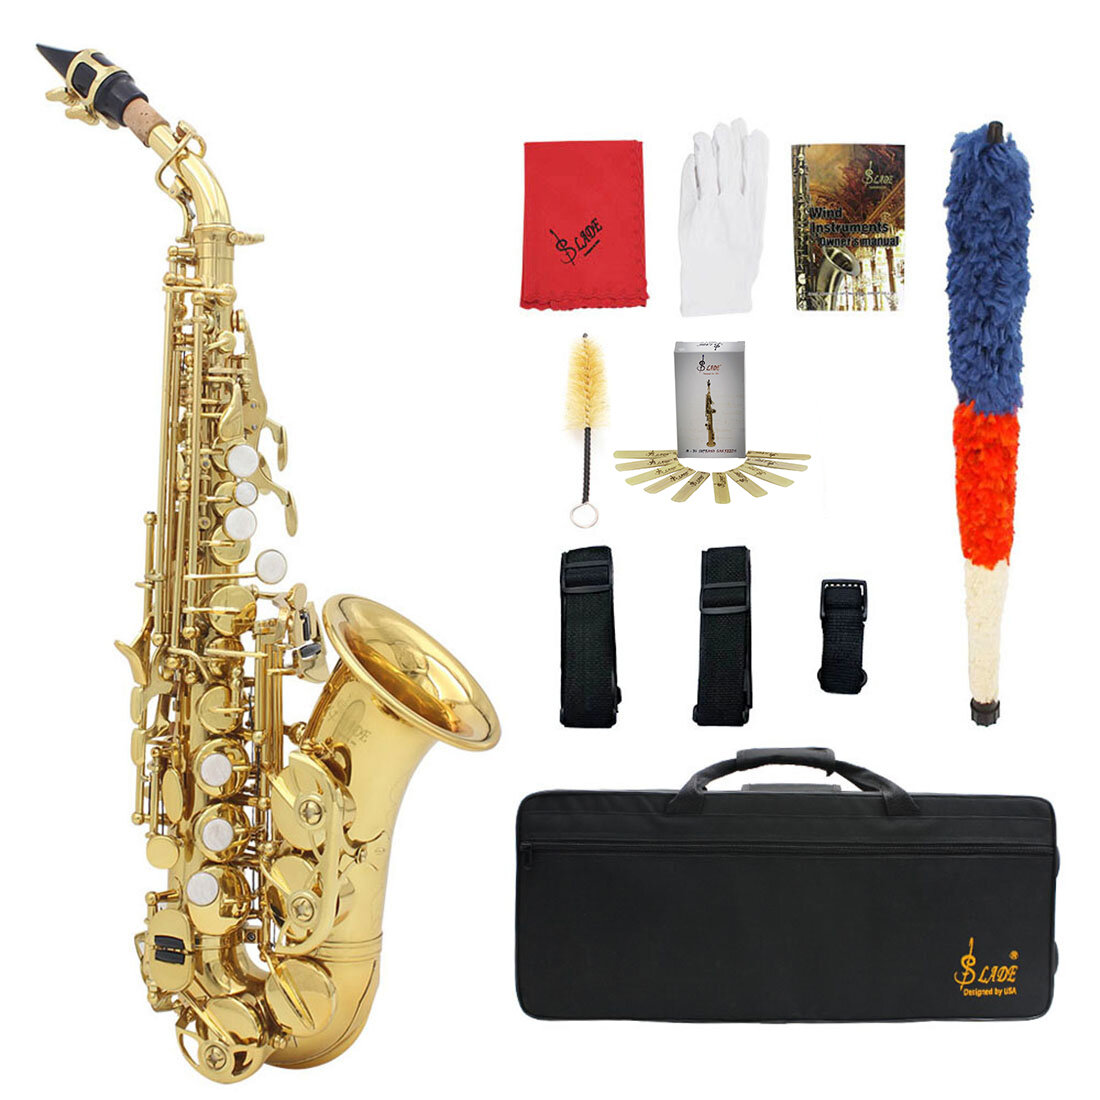 Slade Saxophone Soprano Instrument B-flat Saxophone for Beginner with Cleaning Accessories